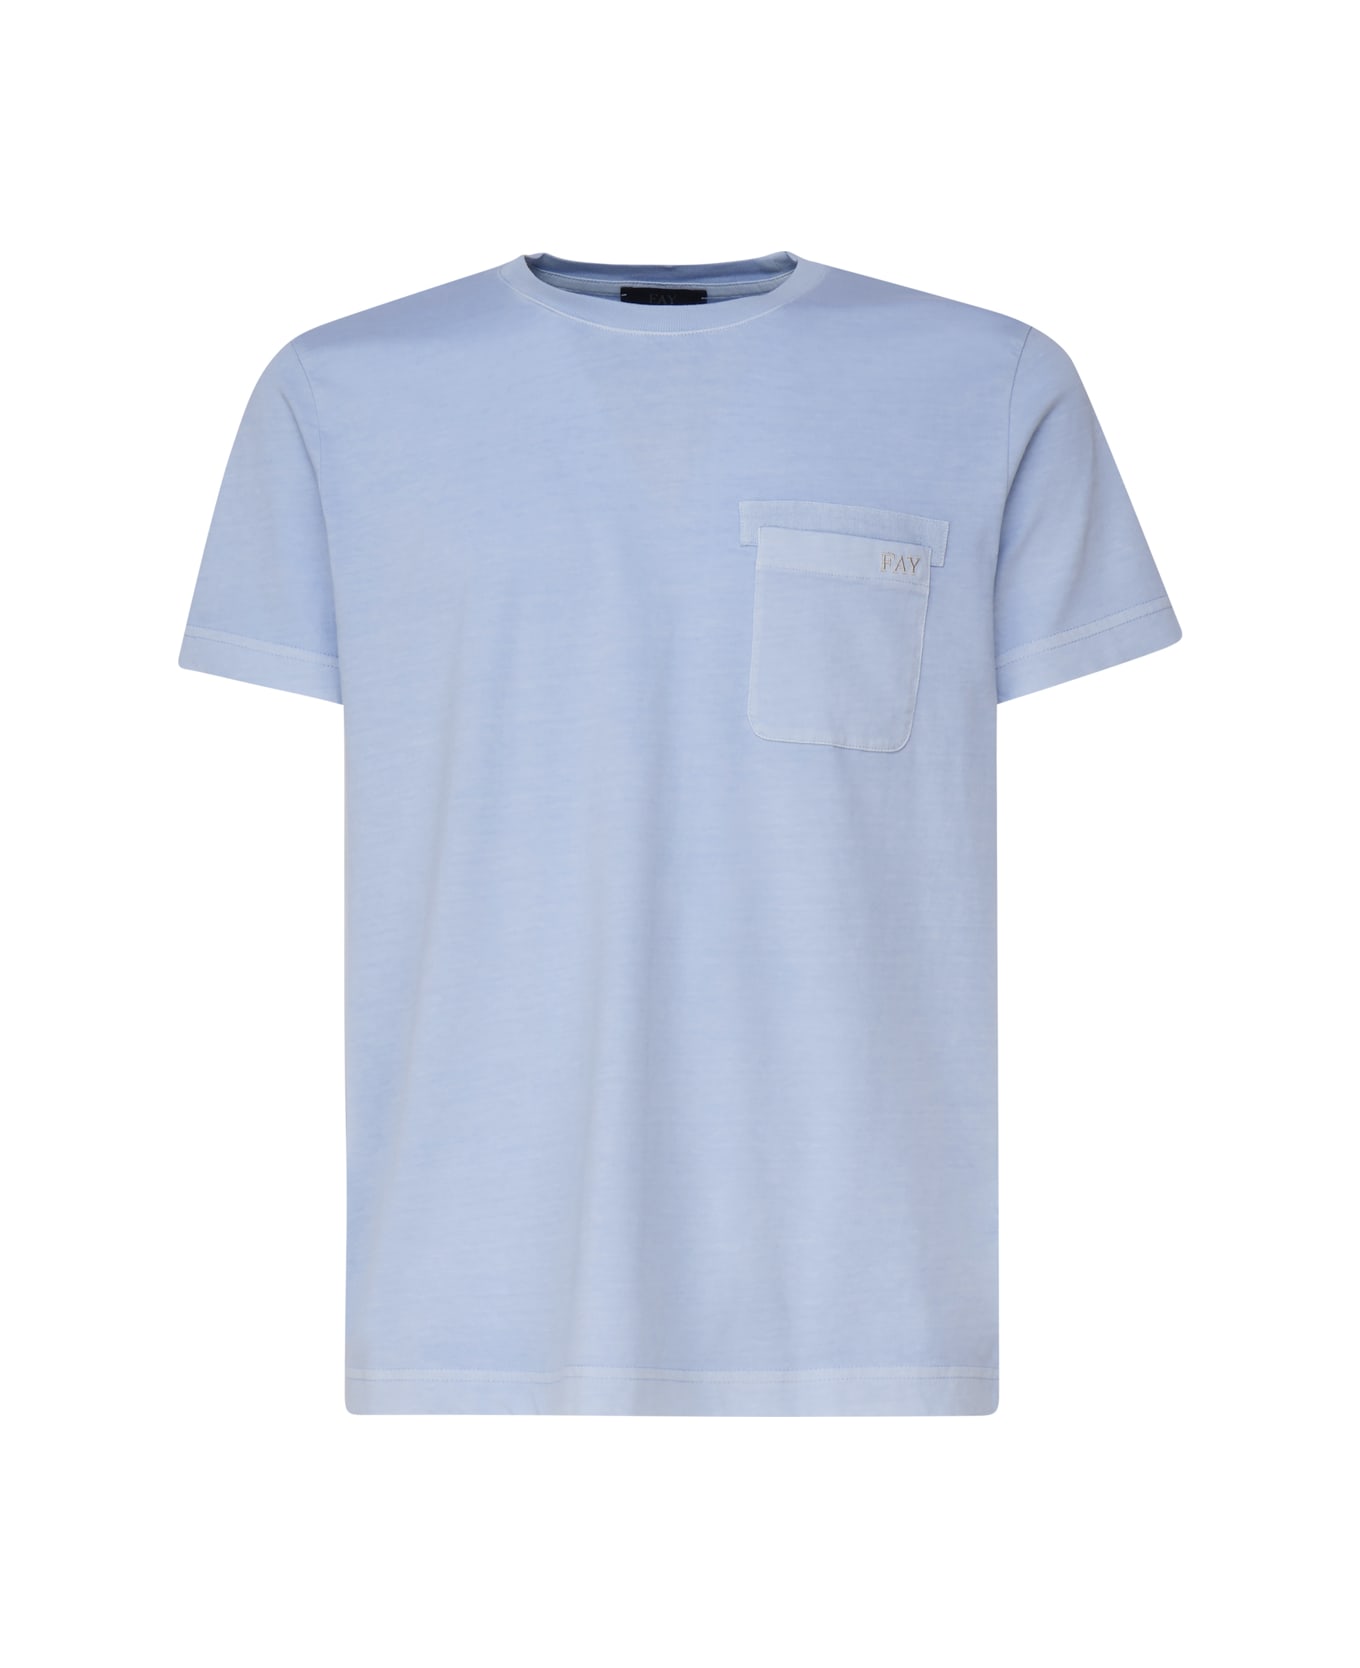 Fay T-shirt With Pocket - Light blue シャツ